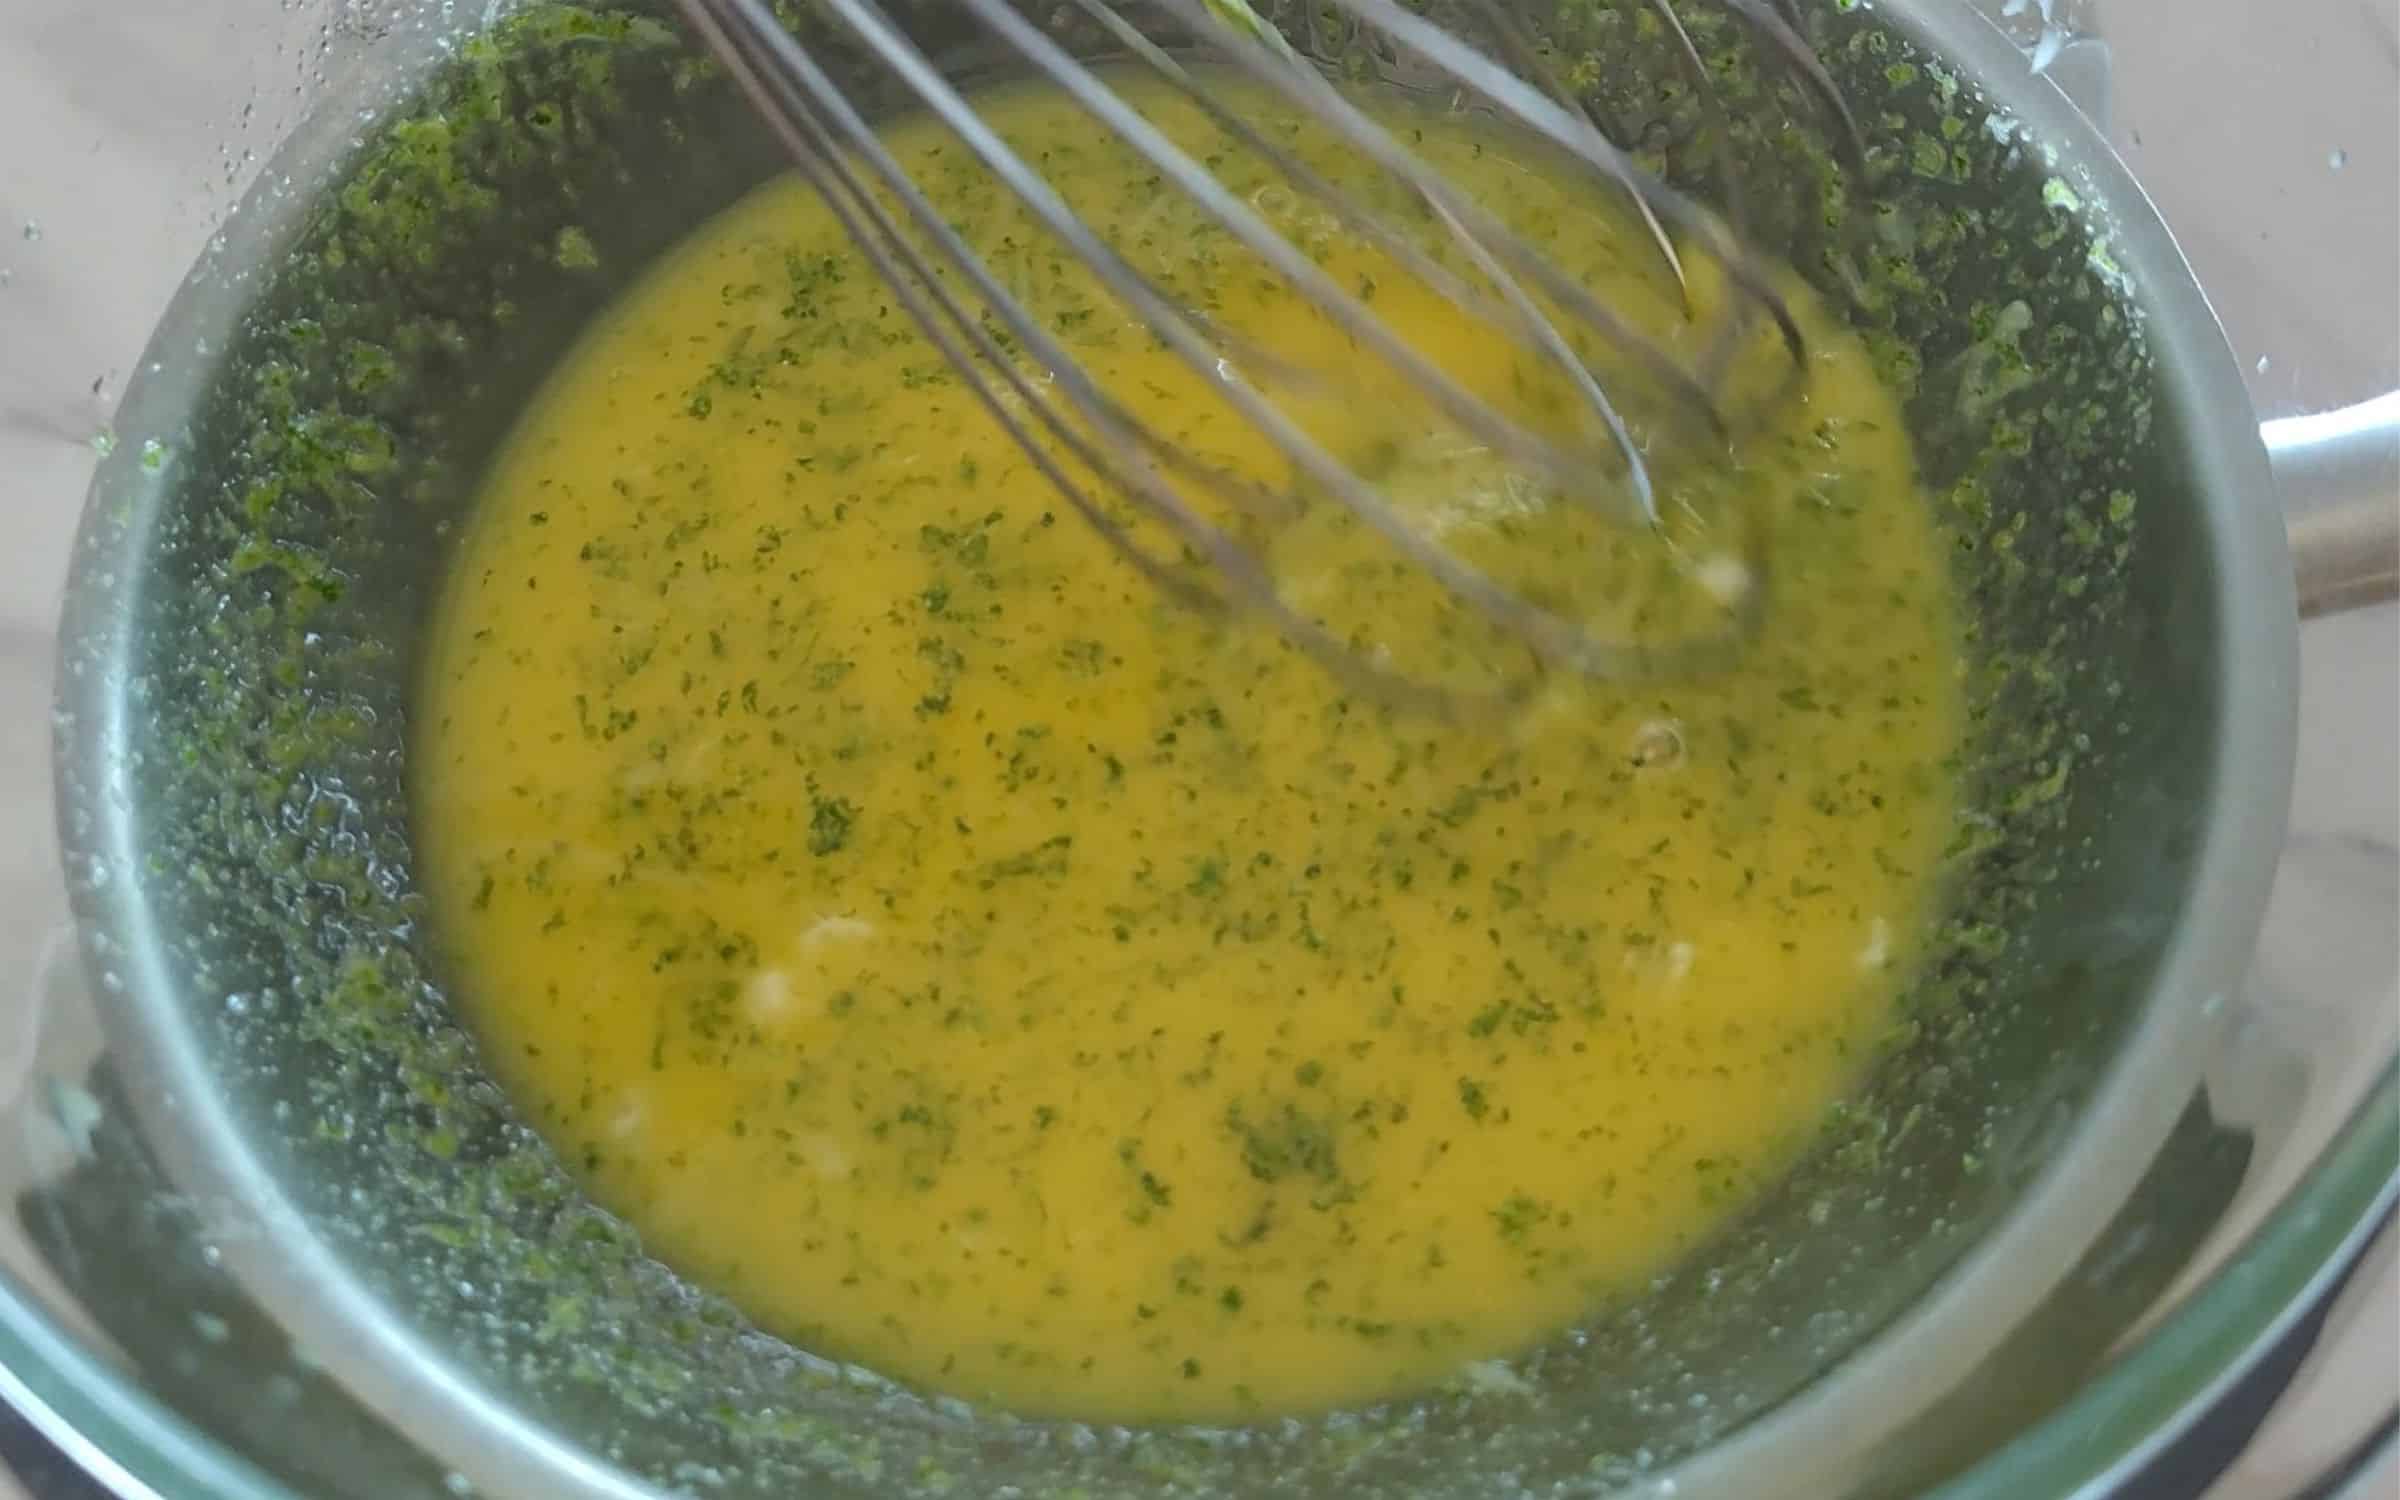 whisking together ingredients over a double boiler